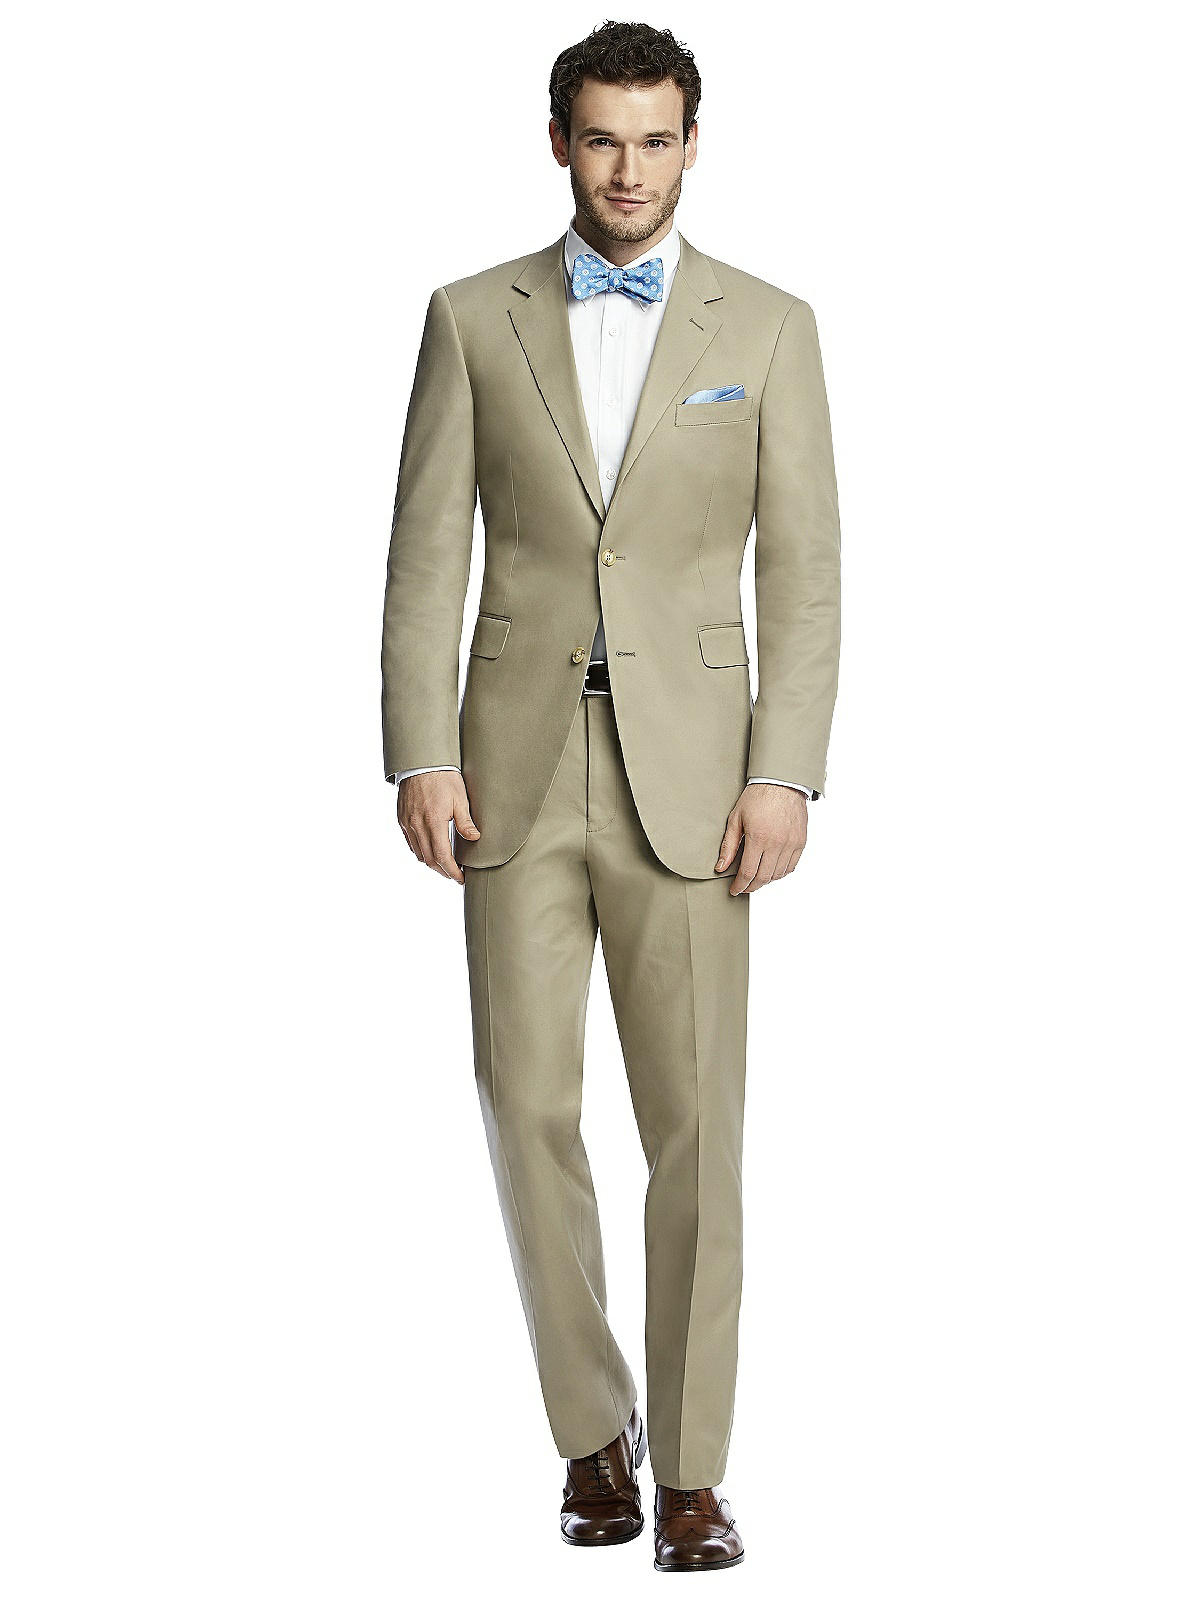 Classic Summer Suit Jacket By After Six In Khaki | The Dessy Group